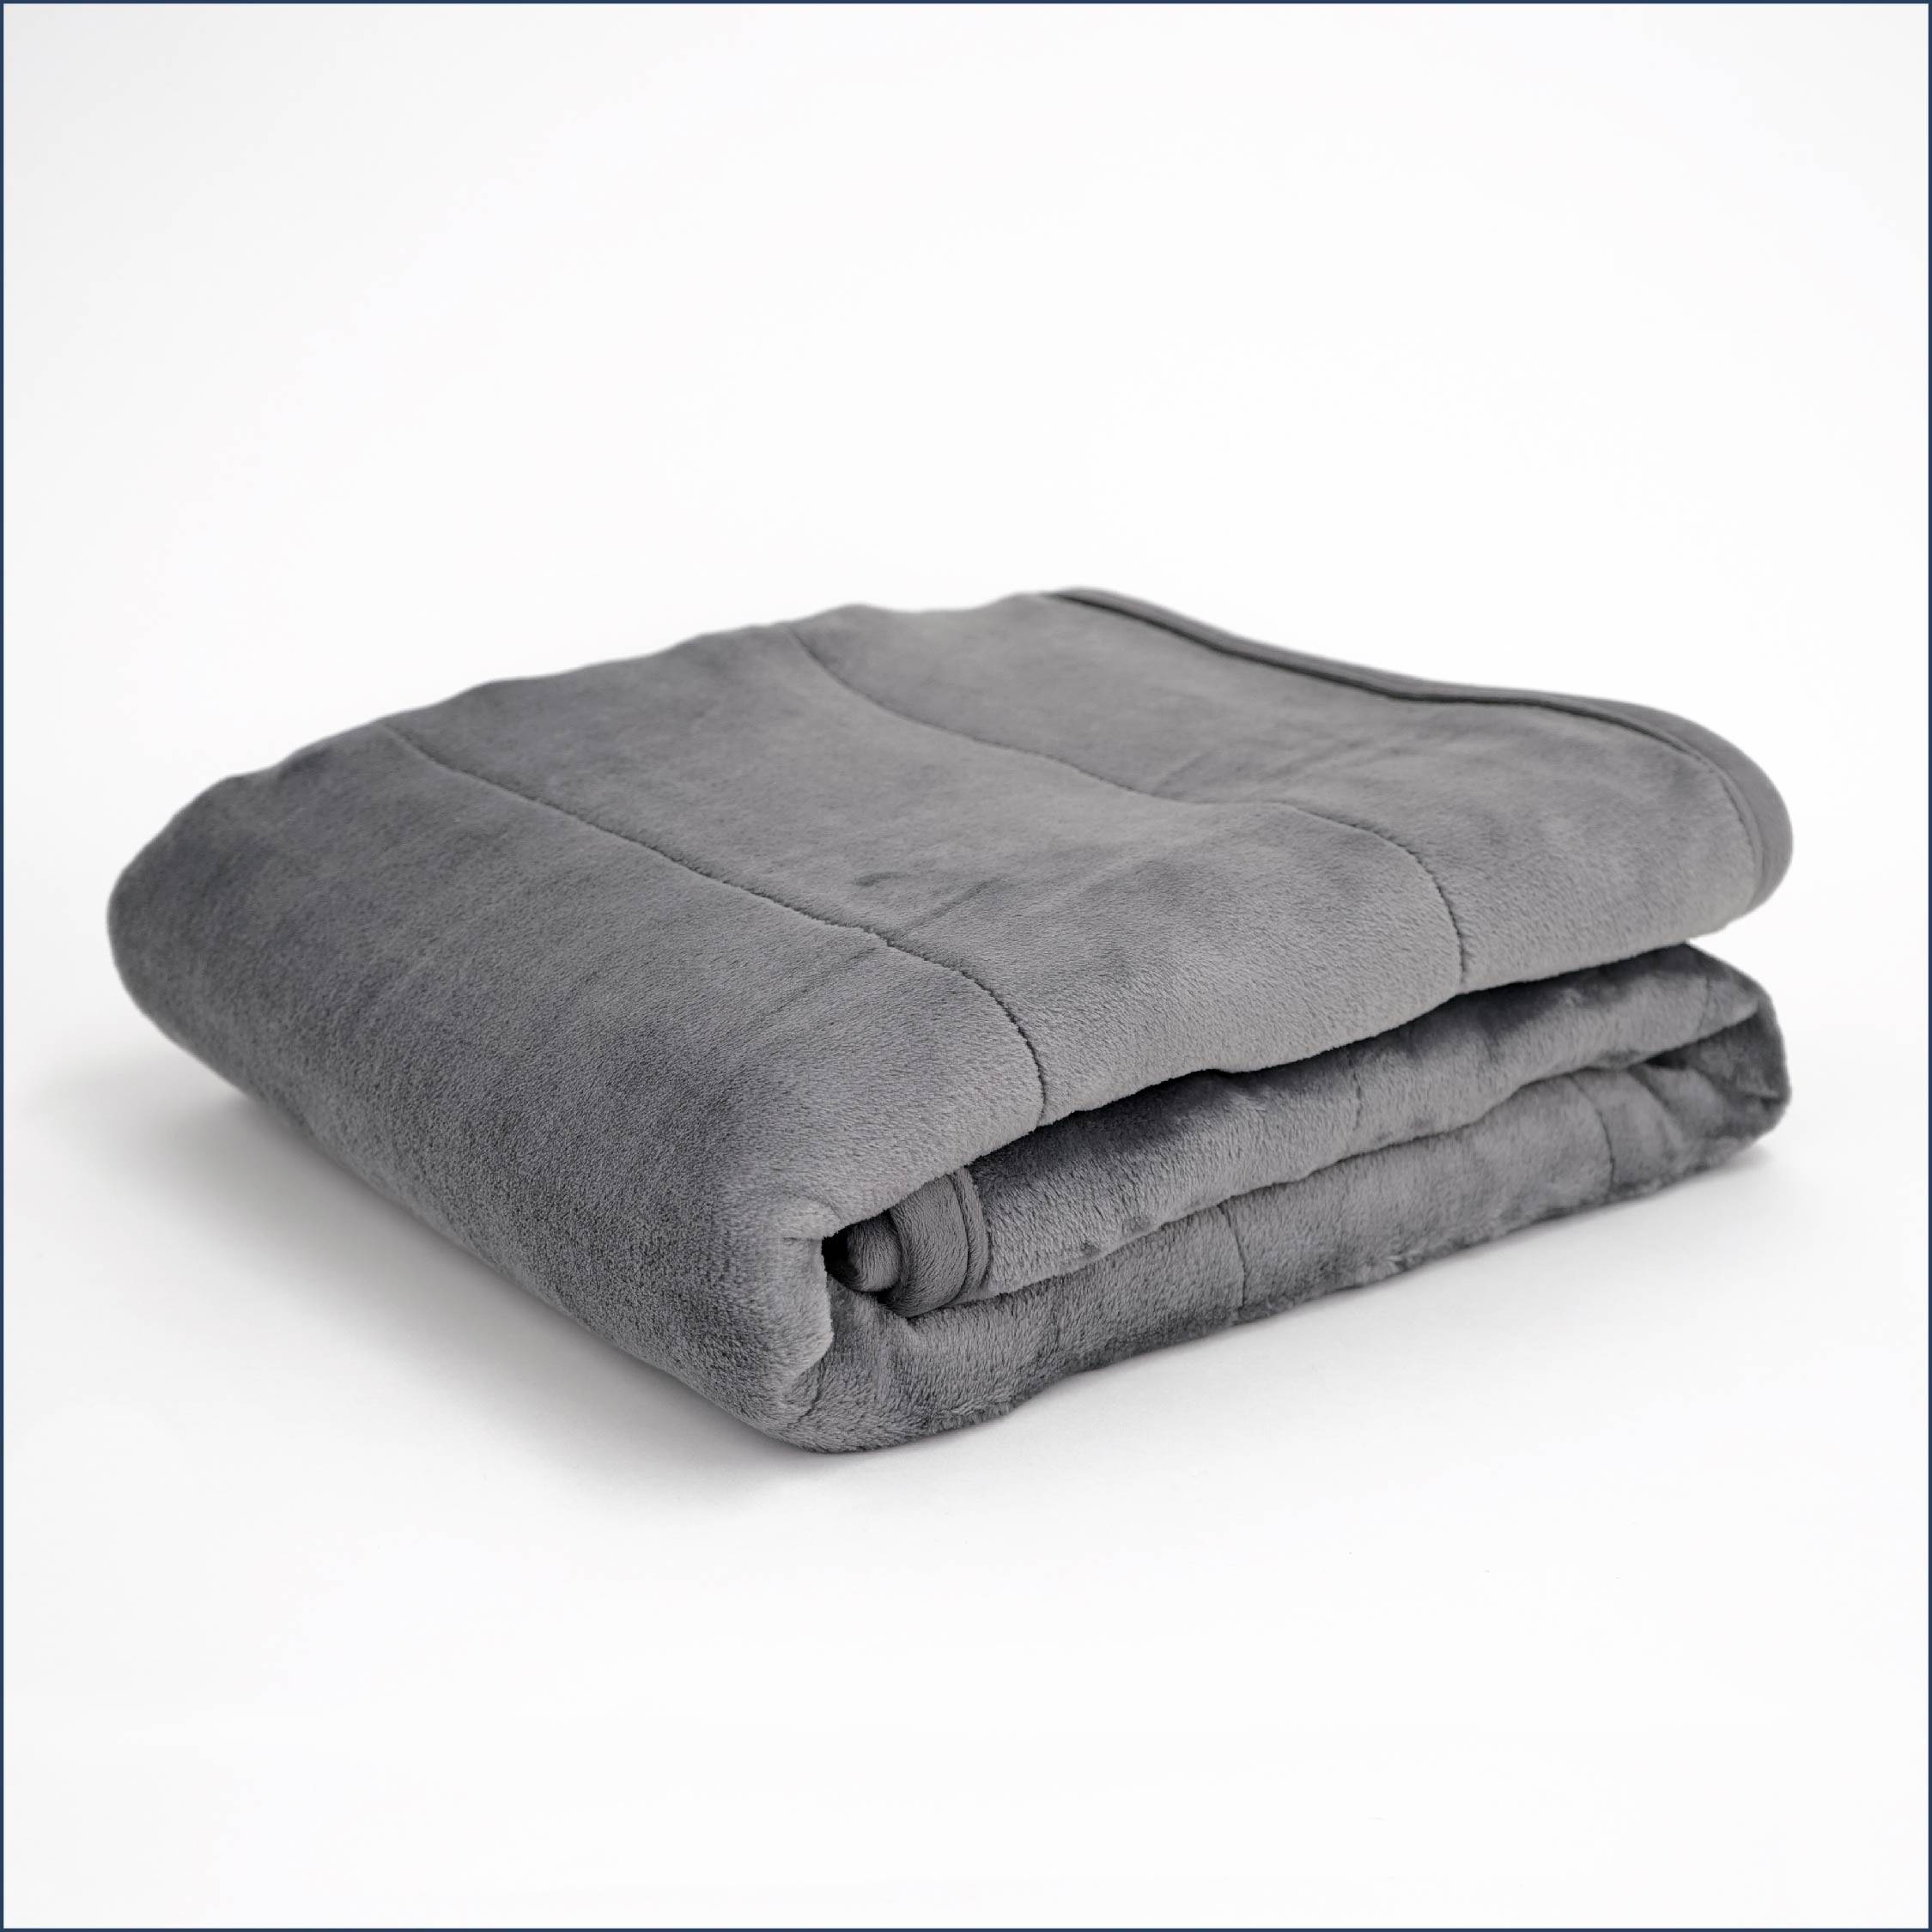 Tuc Warm Weighted Blanket folded on white background.